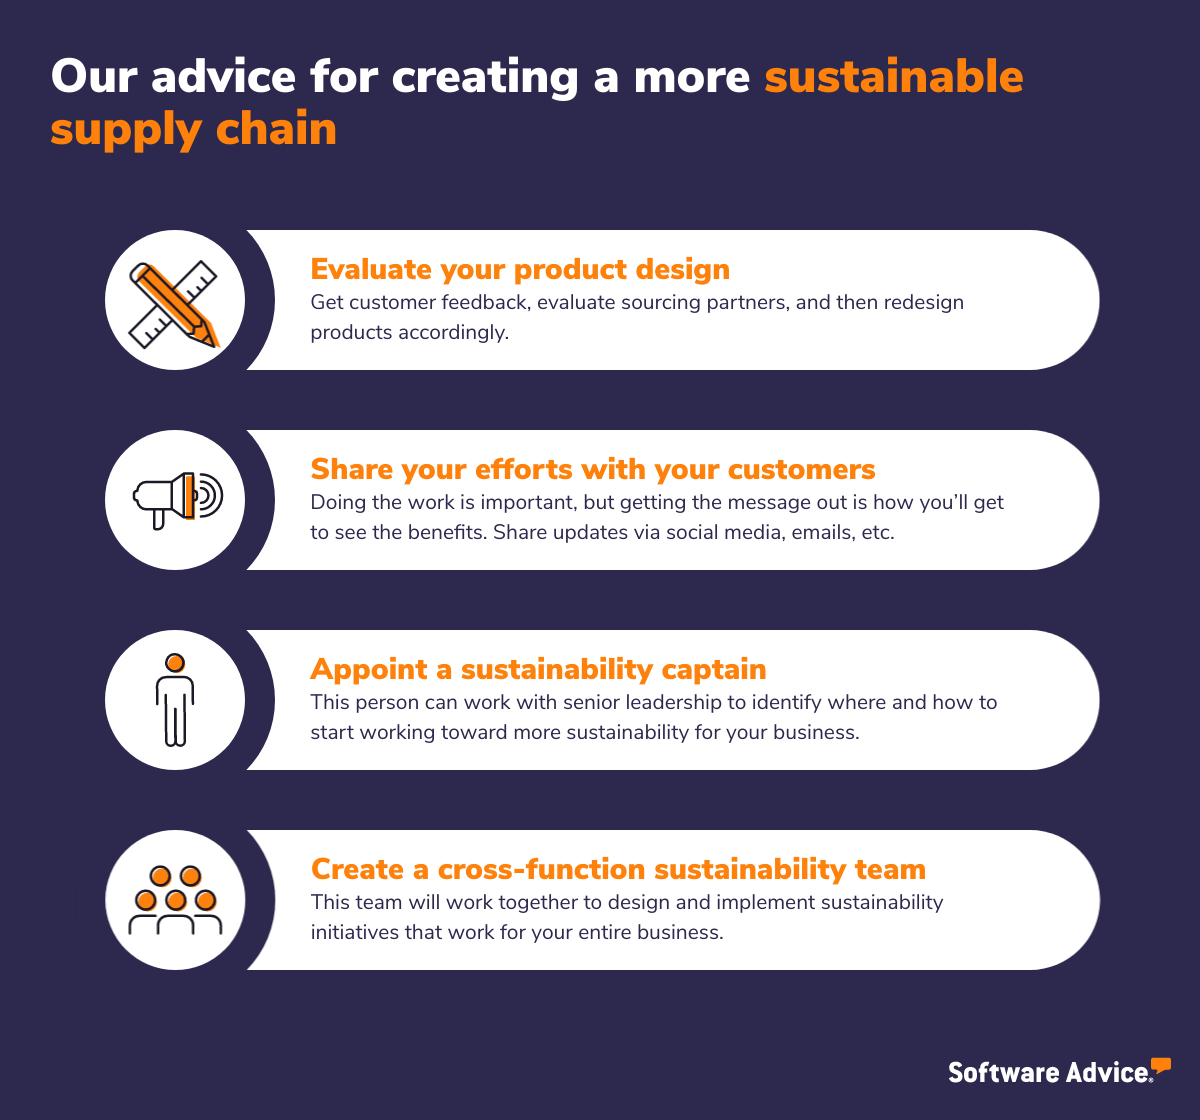 Our-advice-for-a-more-sustainable-supply-chain